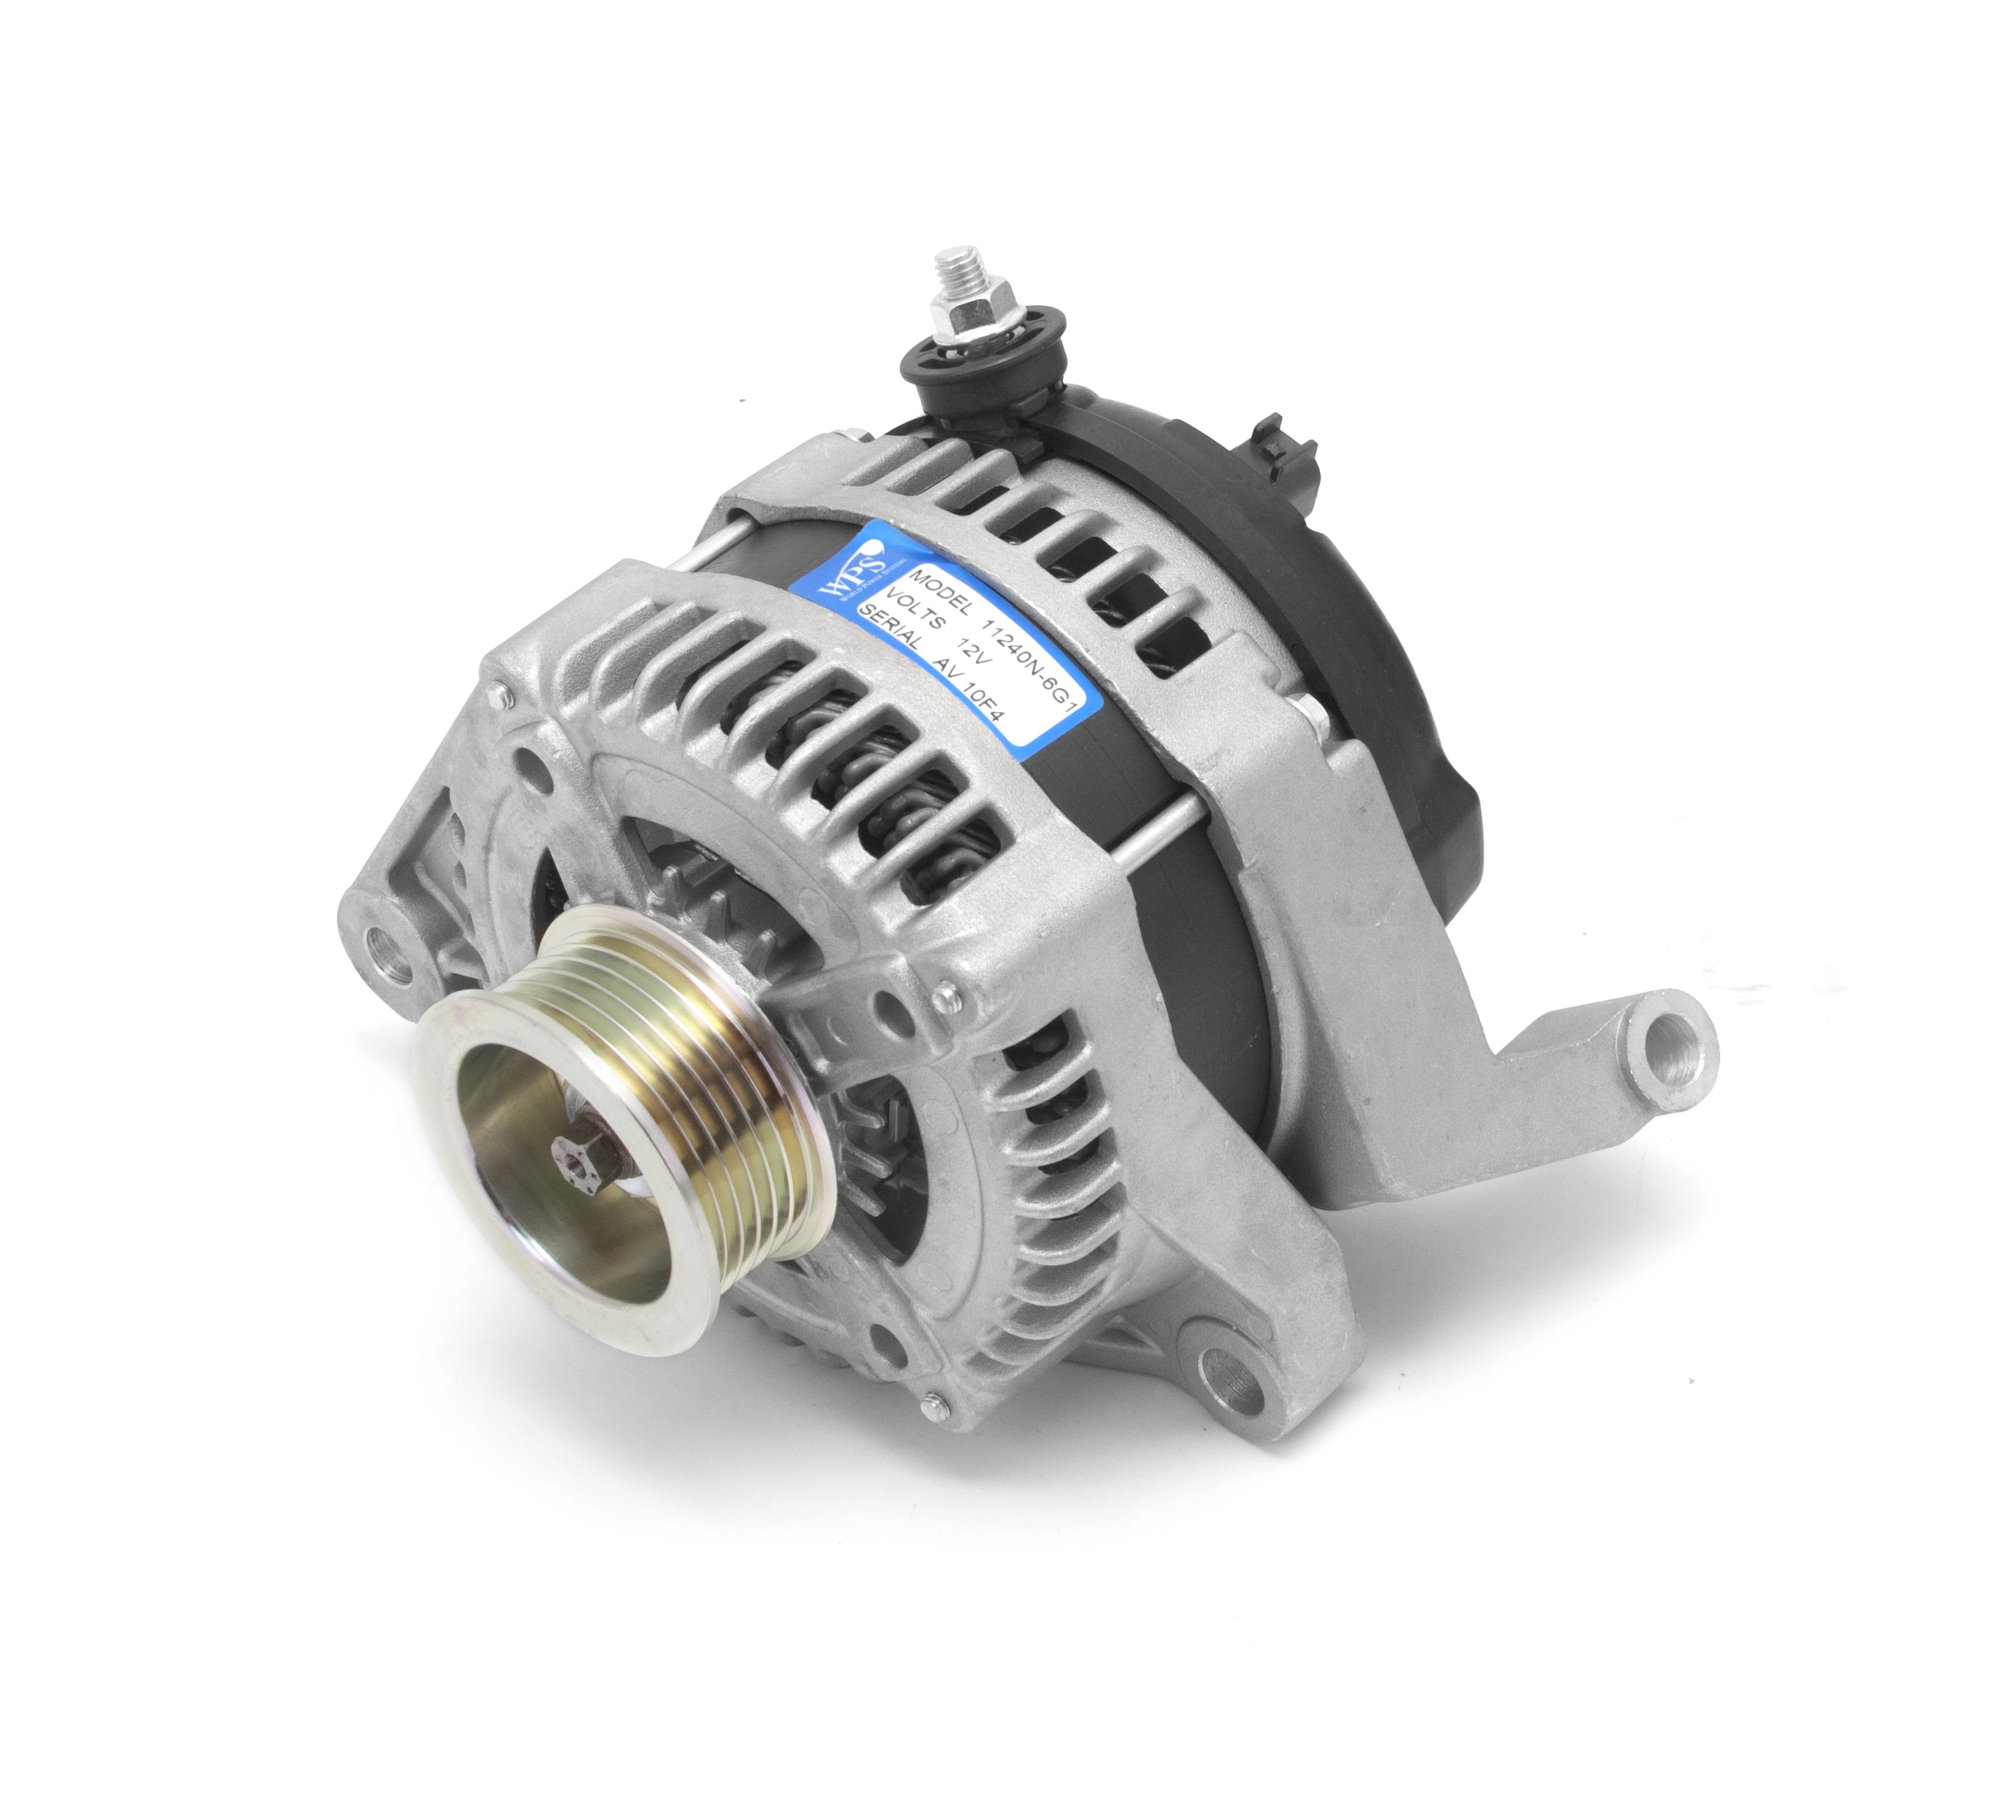 OMIXADA 17225.19 Replacement Alternator for 0710 Jeep